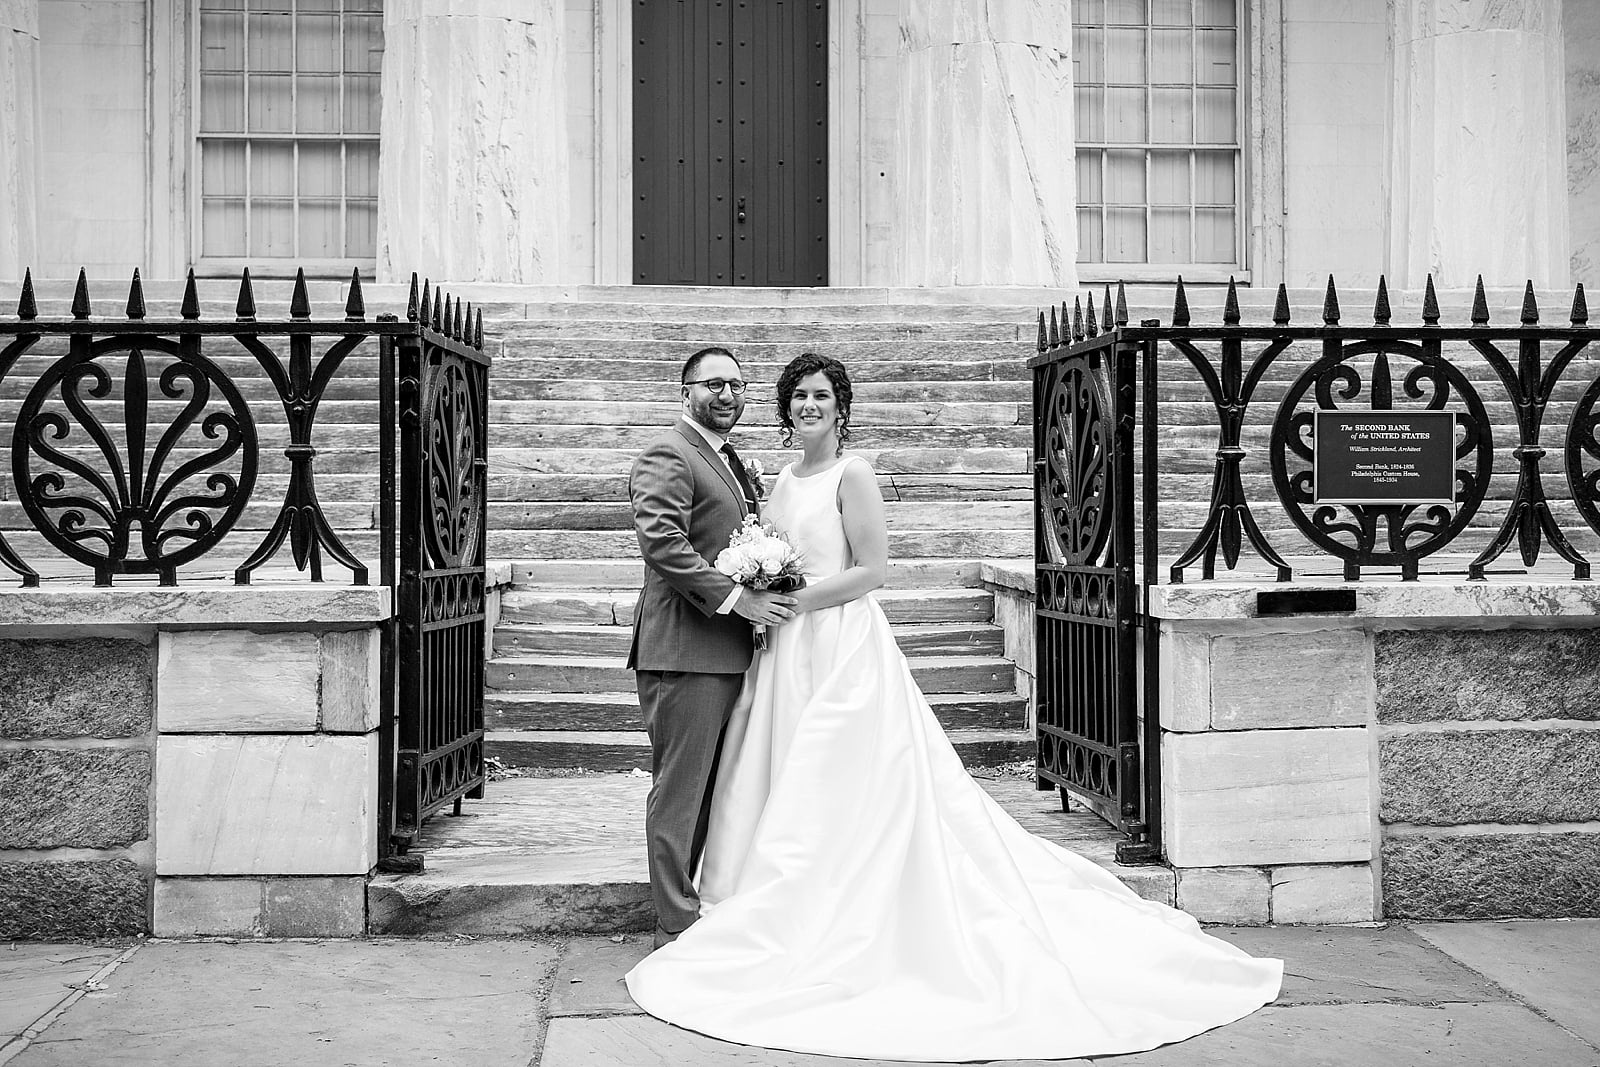 Black & white portrait in front of wrought iron gates at Philadelphia's Second National Bank